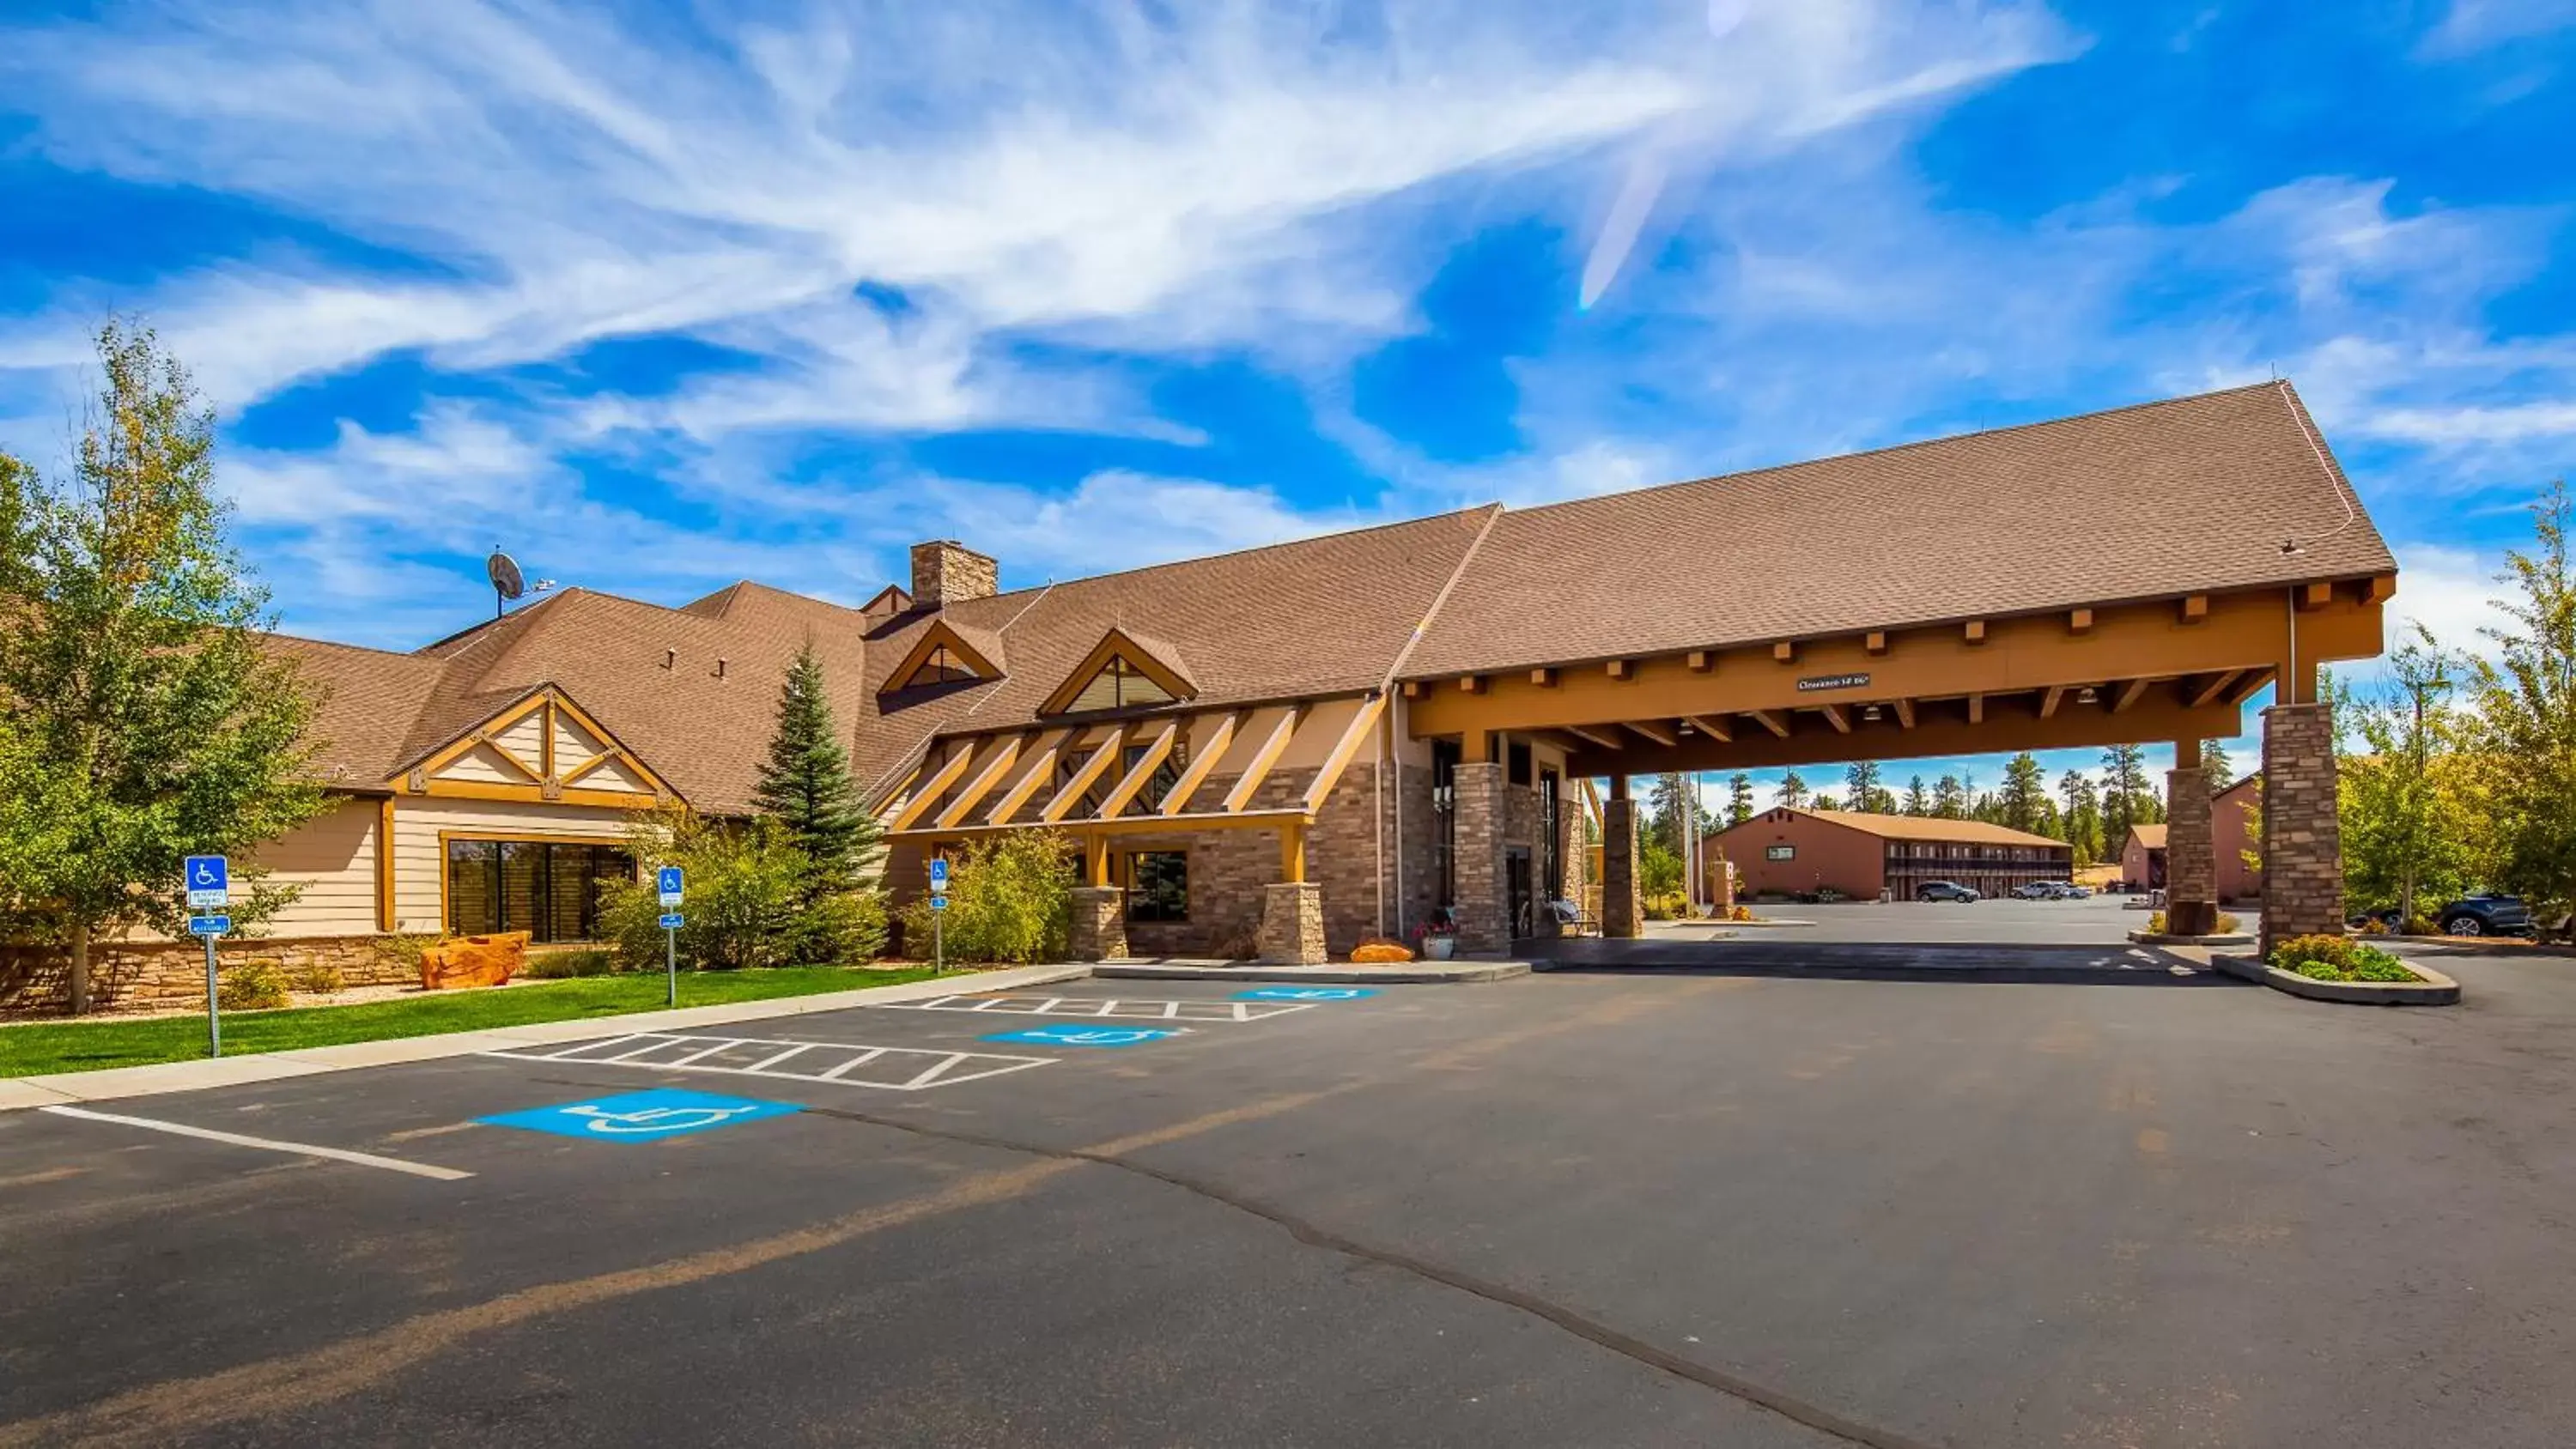 Property Building in Best Western PLUS Bryce Canyon Grand Hotel